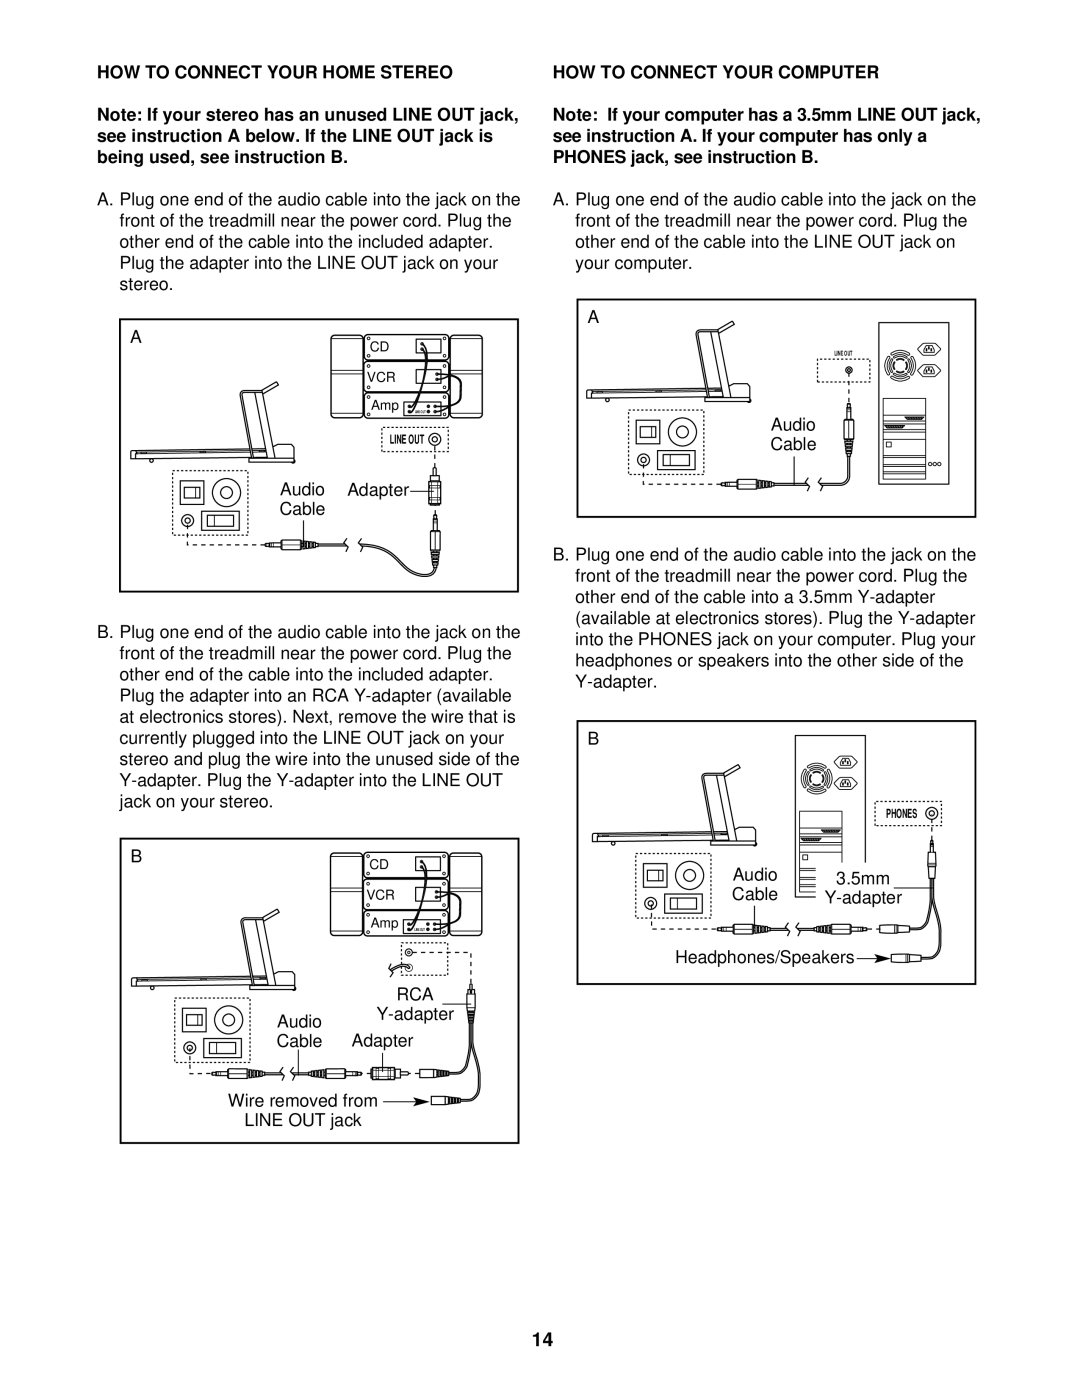 ProForm PFTL69502 user manual HOW to Connect Your Home Stereo, HOW to Connect Your Computer 